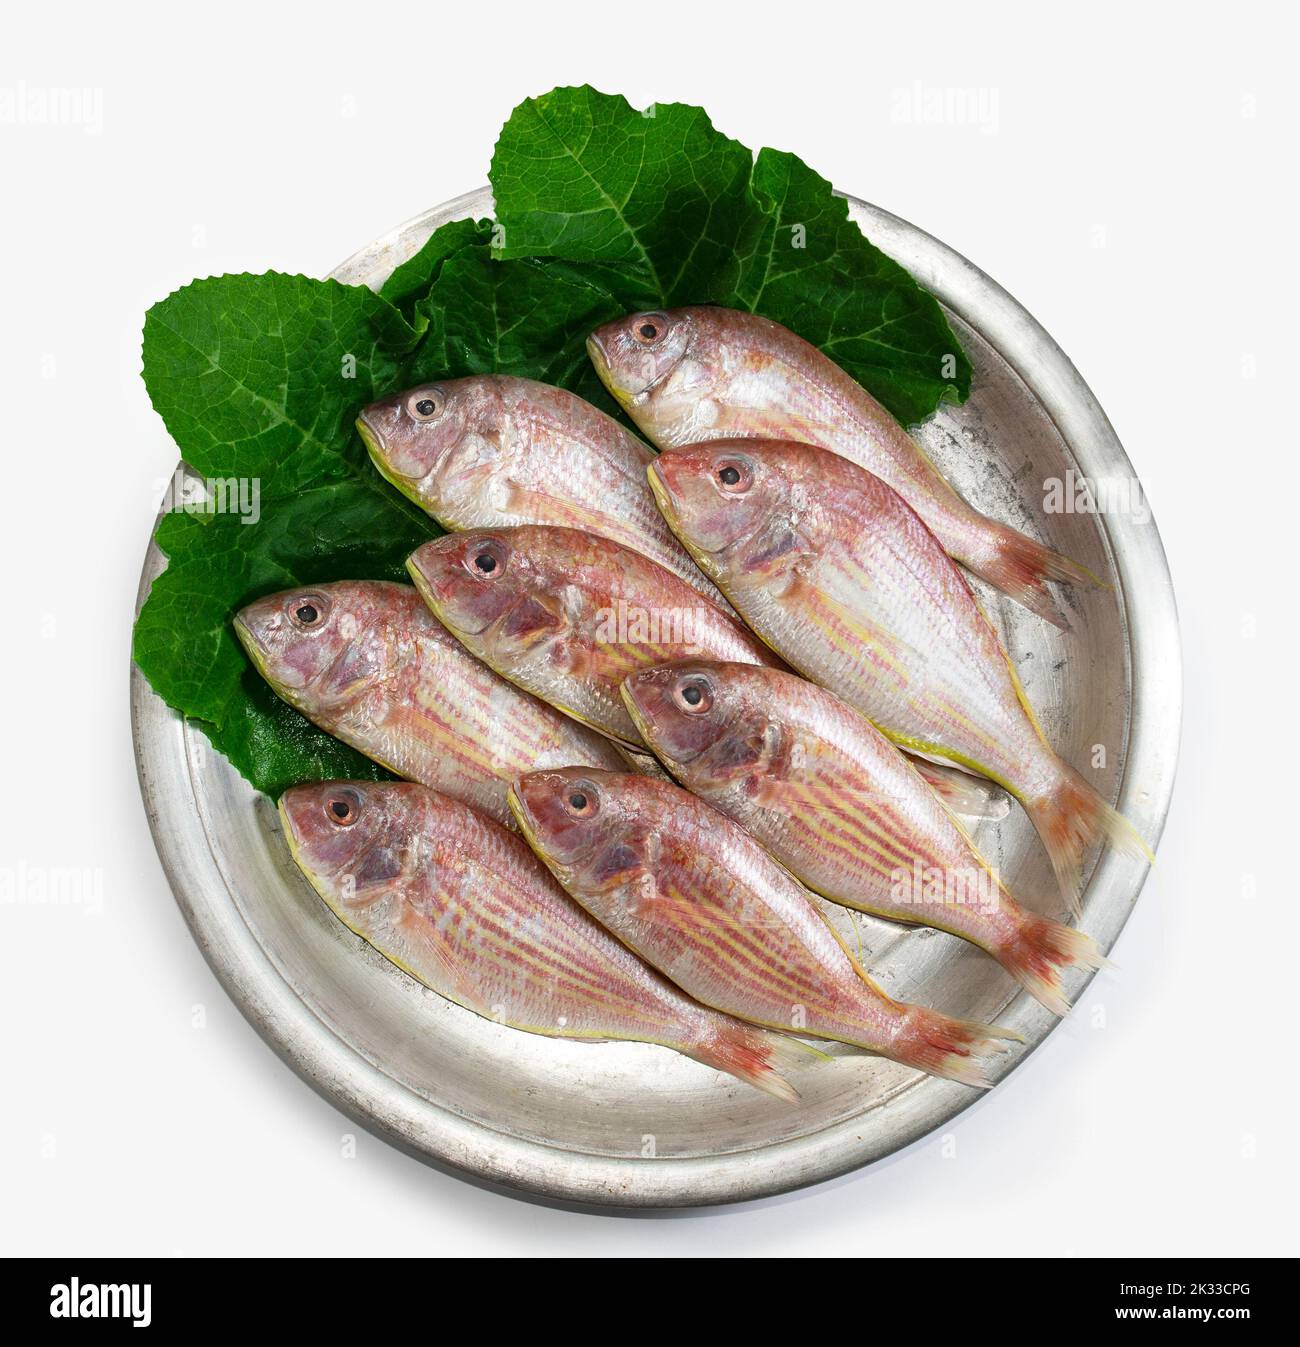 Red croaker, Lal poa, Pama, Poa fish on aluminum tray with pumpkin leaves. seafood. Stock Photo